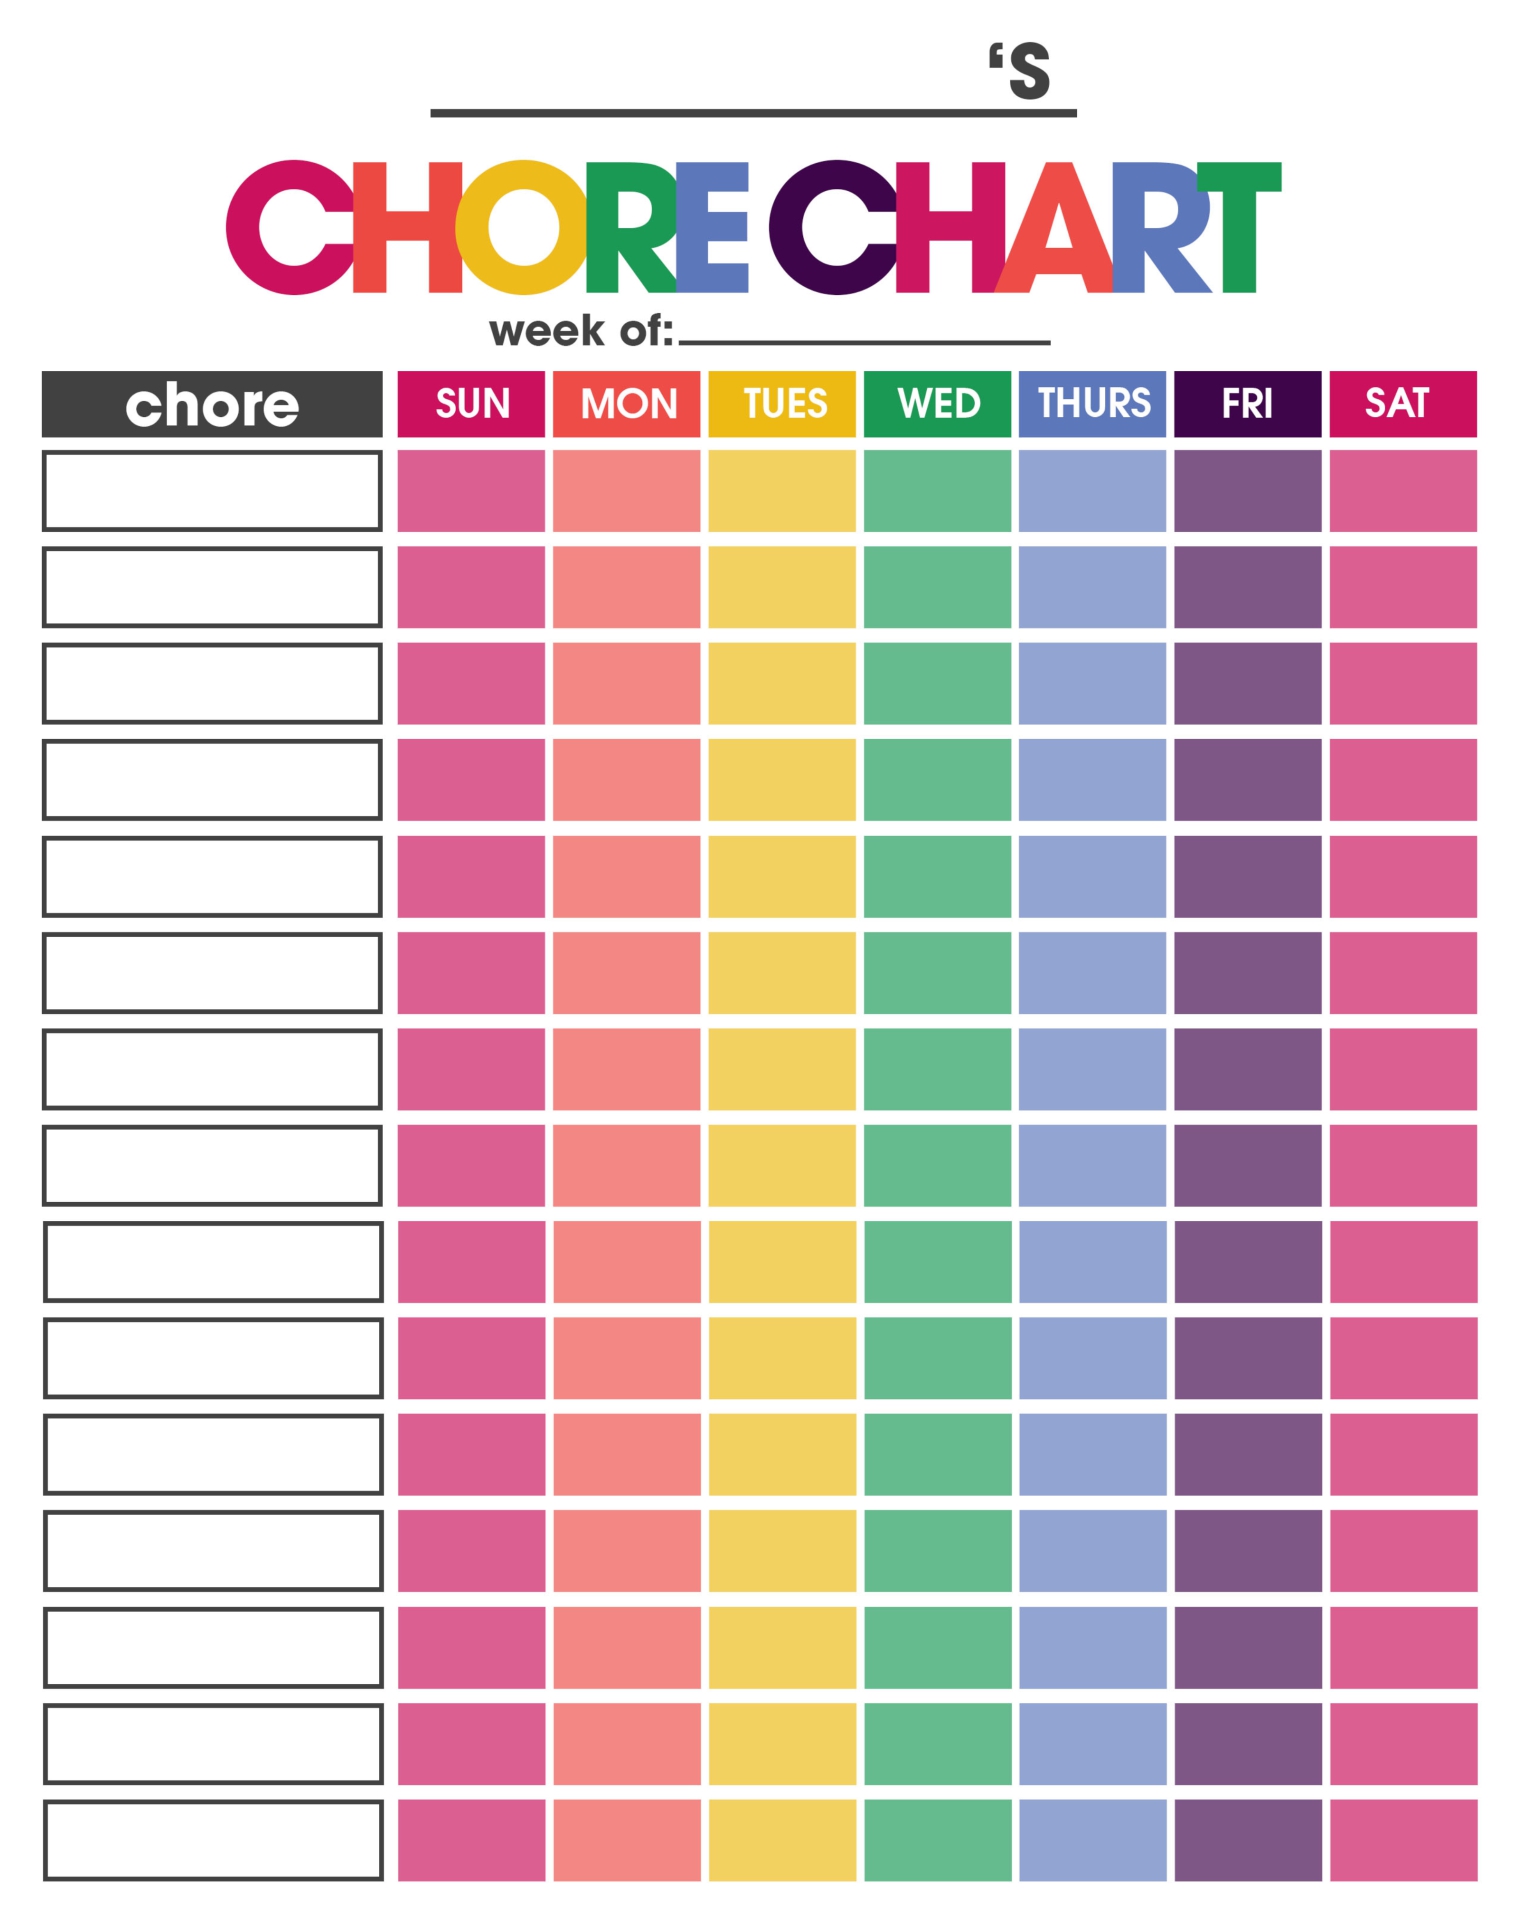 chore-chart-by-age-printable-image-to-u